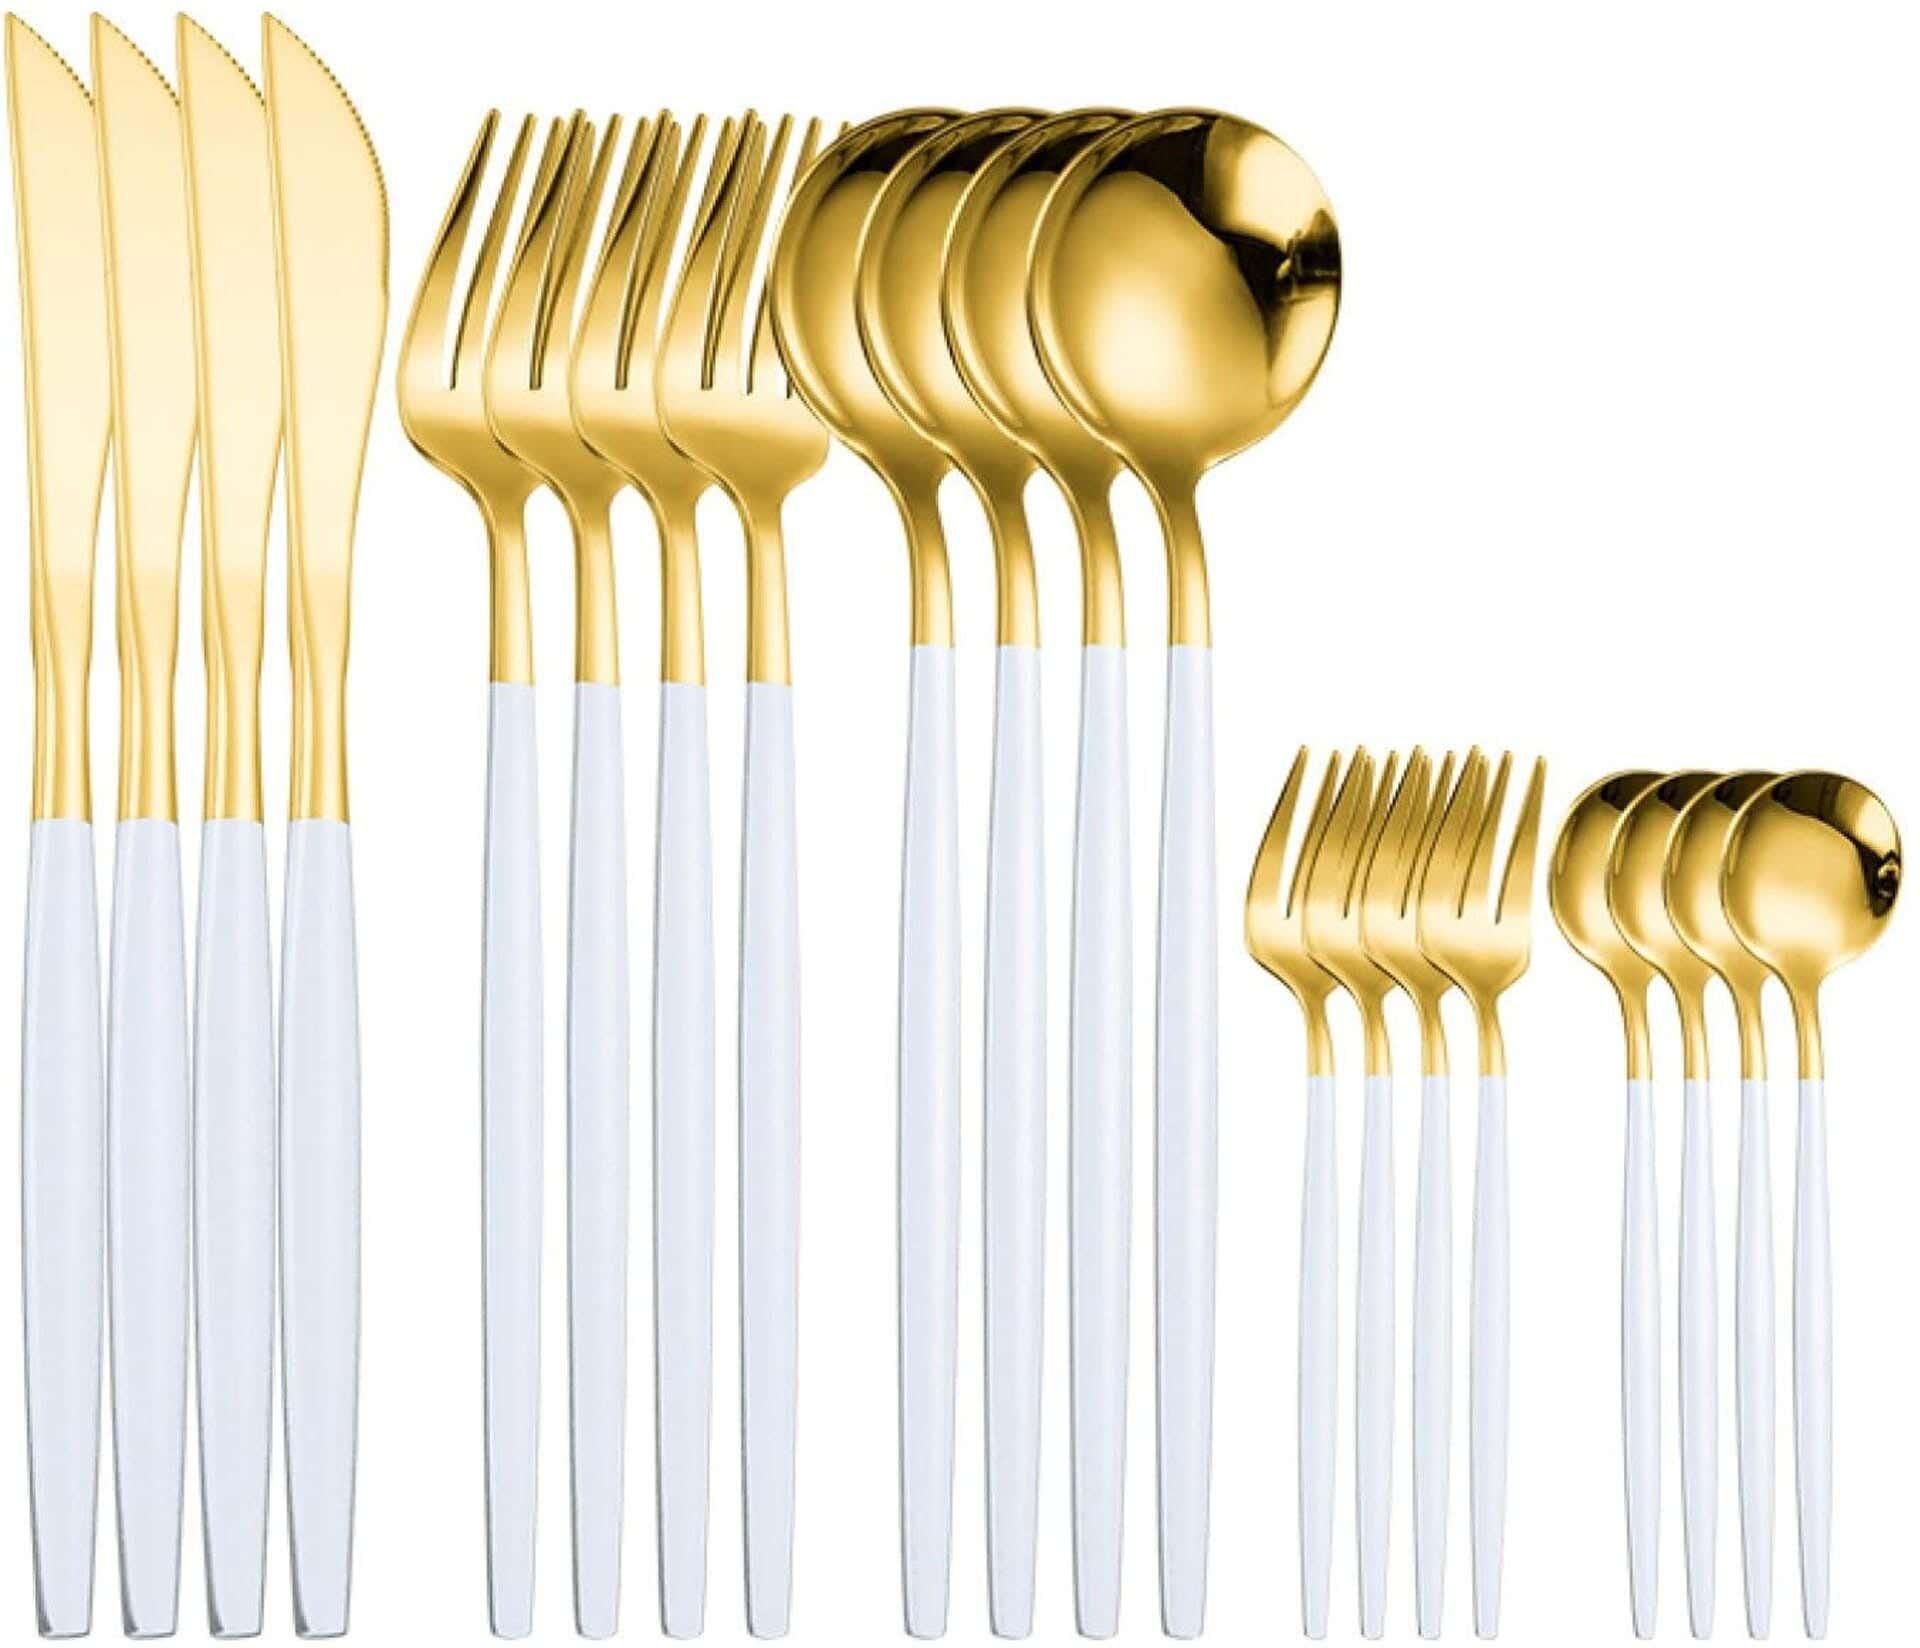 Get Stainless steel cutlery set, 30 pieces - White Gold with best offers | Raneen.com